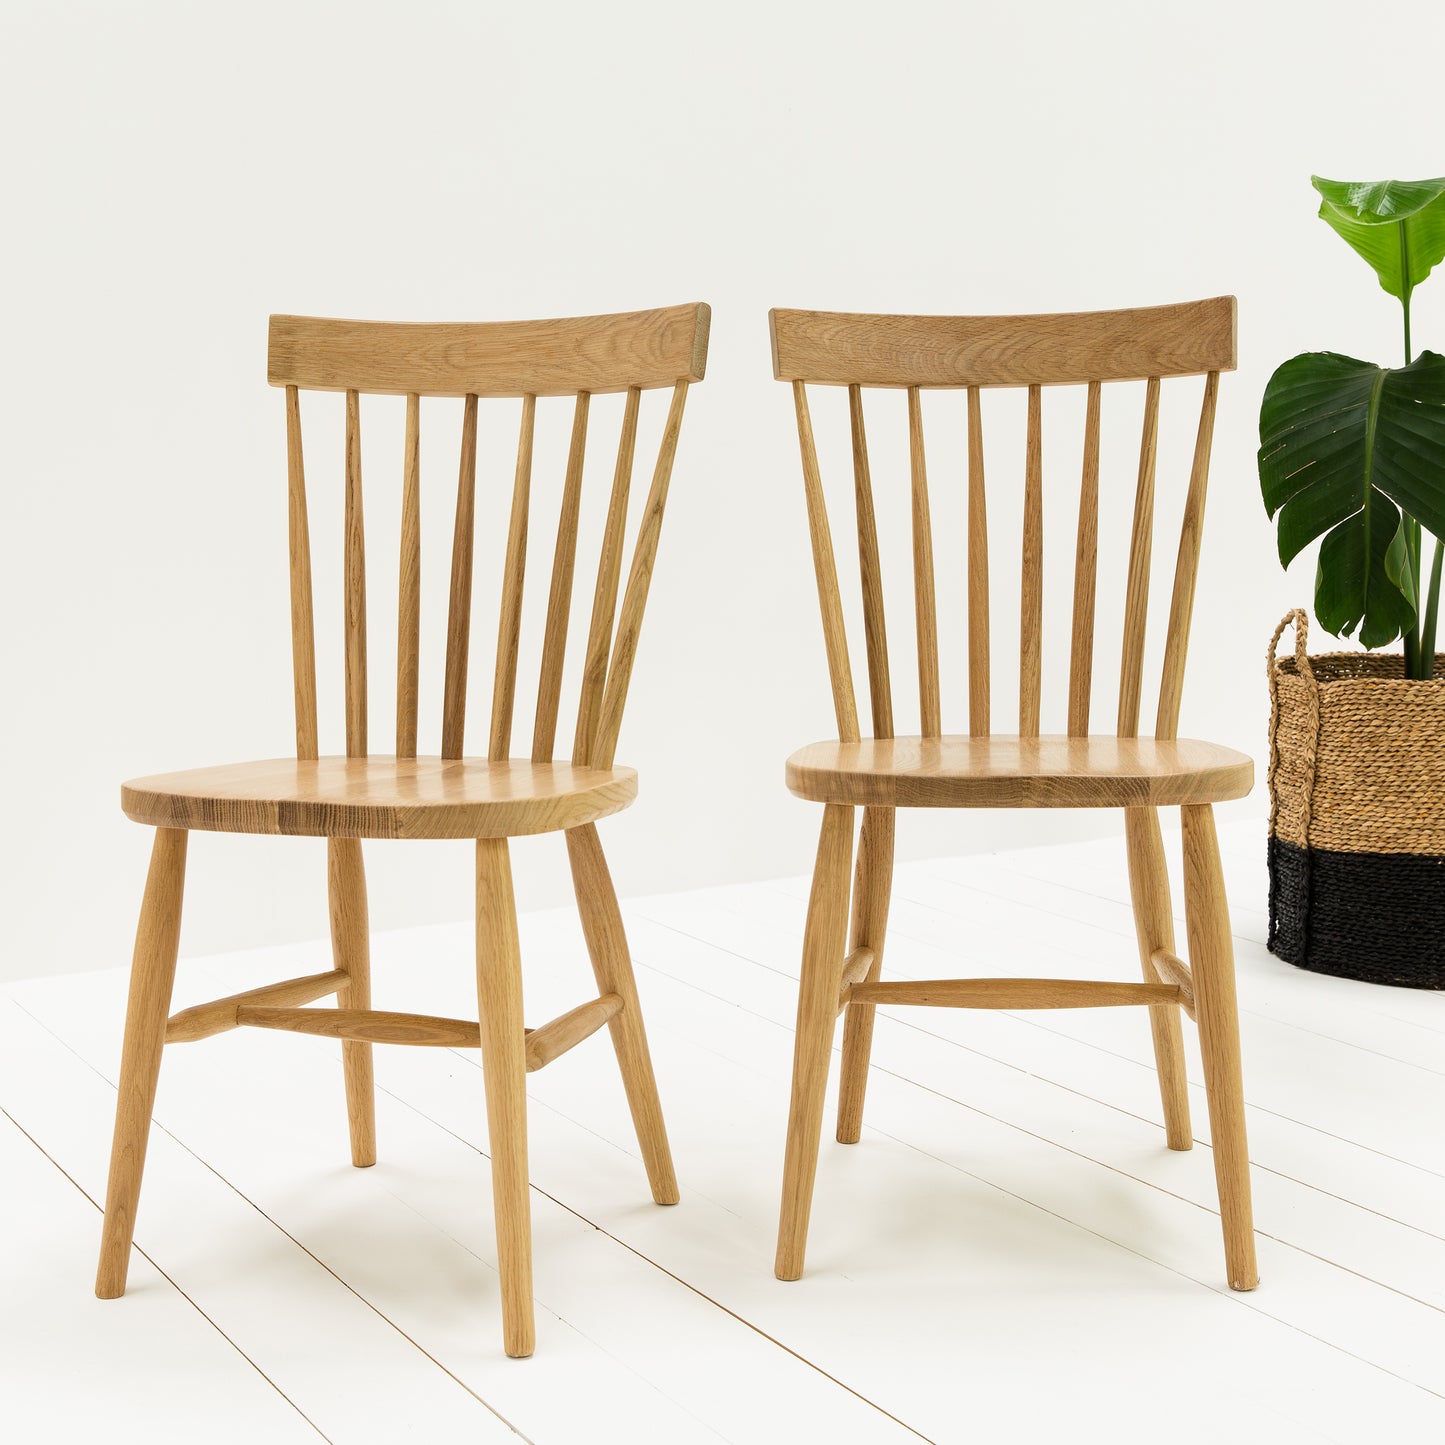 Two Kiki Oak Spindle Back Dining Chairs paired with a plant, enhancing interior decor.